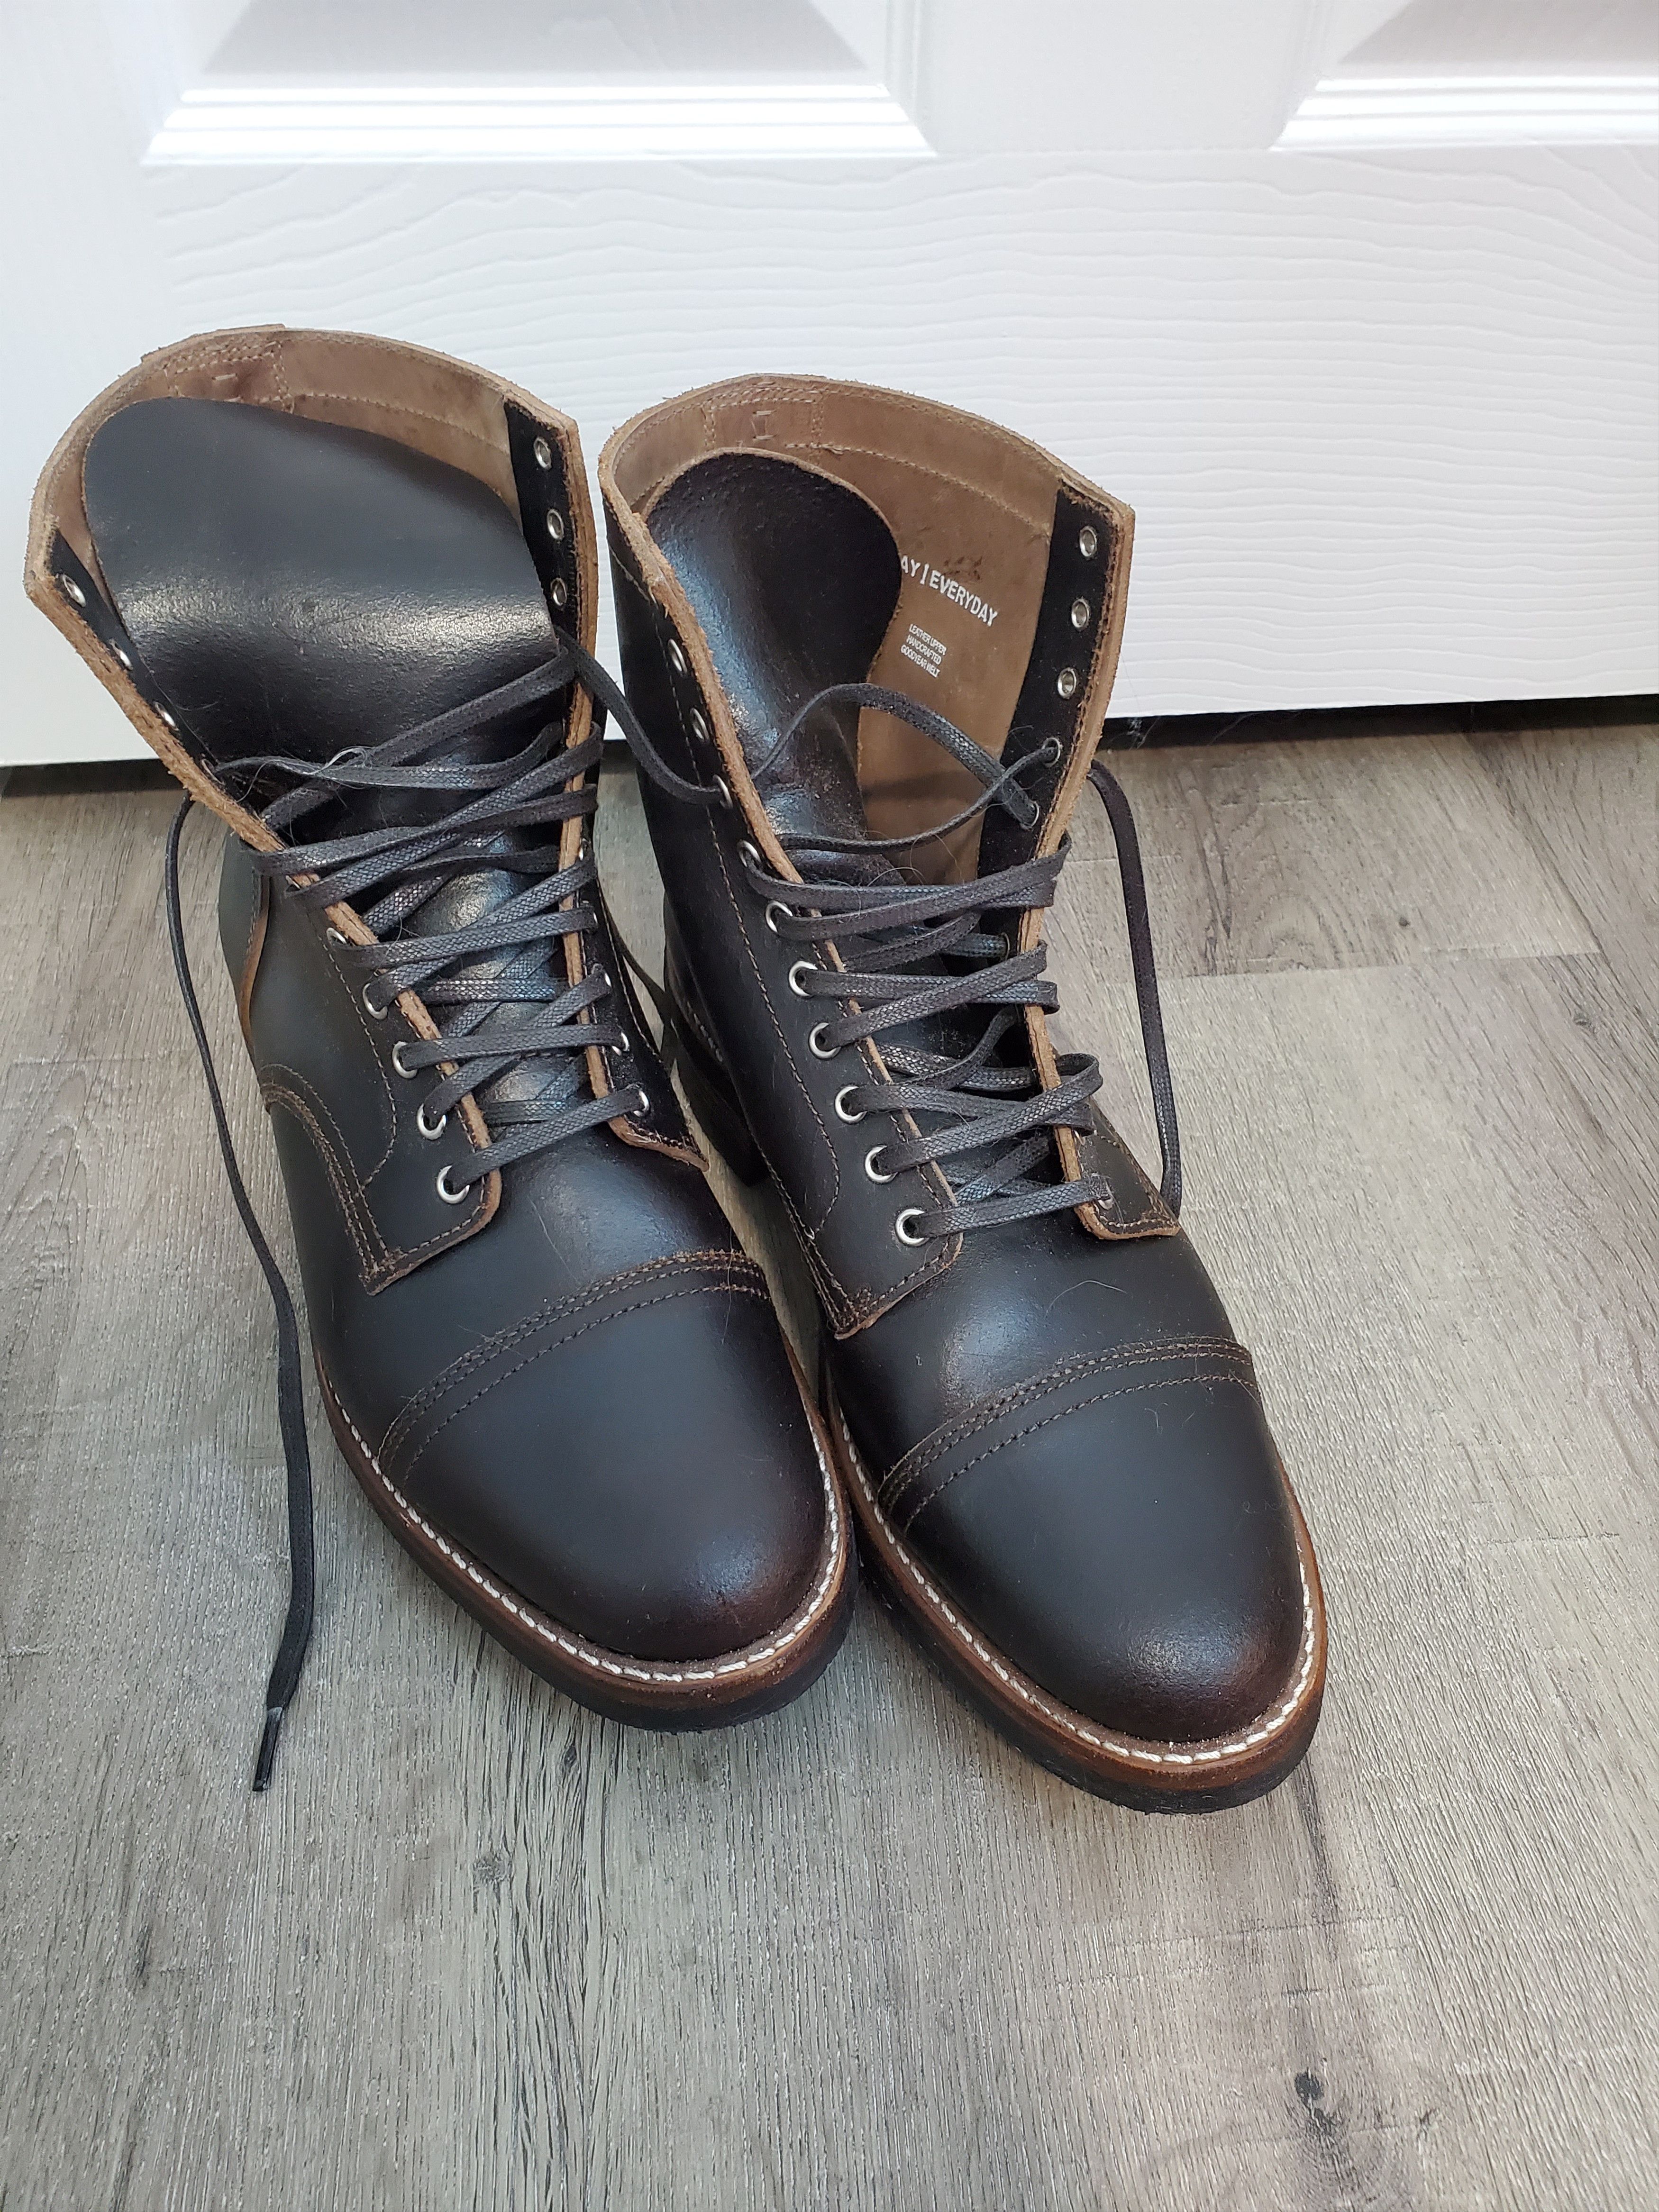 Thursday Boots Thursday Boot Loggers Waxed Cacao Size US 10 / EU 43 - 1 Preview